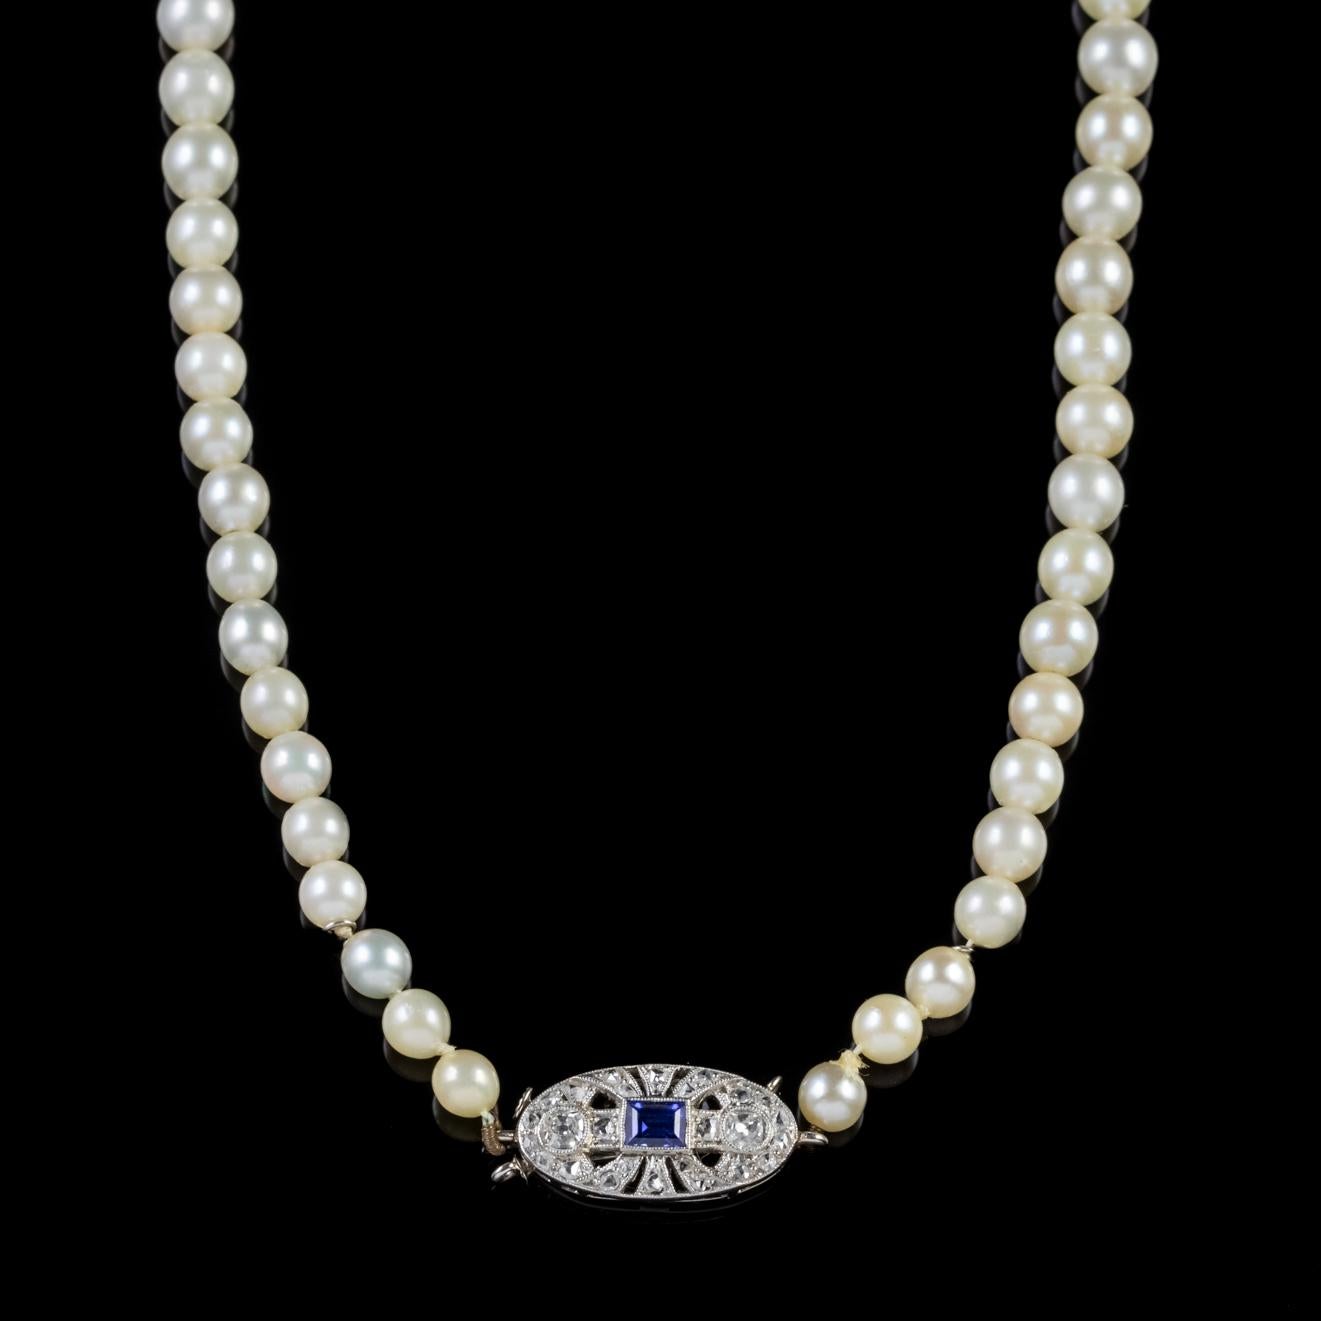 An elegant Art Deco cultured Pearl necklace made up the most beautiful, lustrous Pearls which graduate in size to a fabulous box clasp decorated with old cut Diamonds and a lovely French cut Sapphire in the centre which is approx. 0.15ct

Pearls are